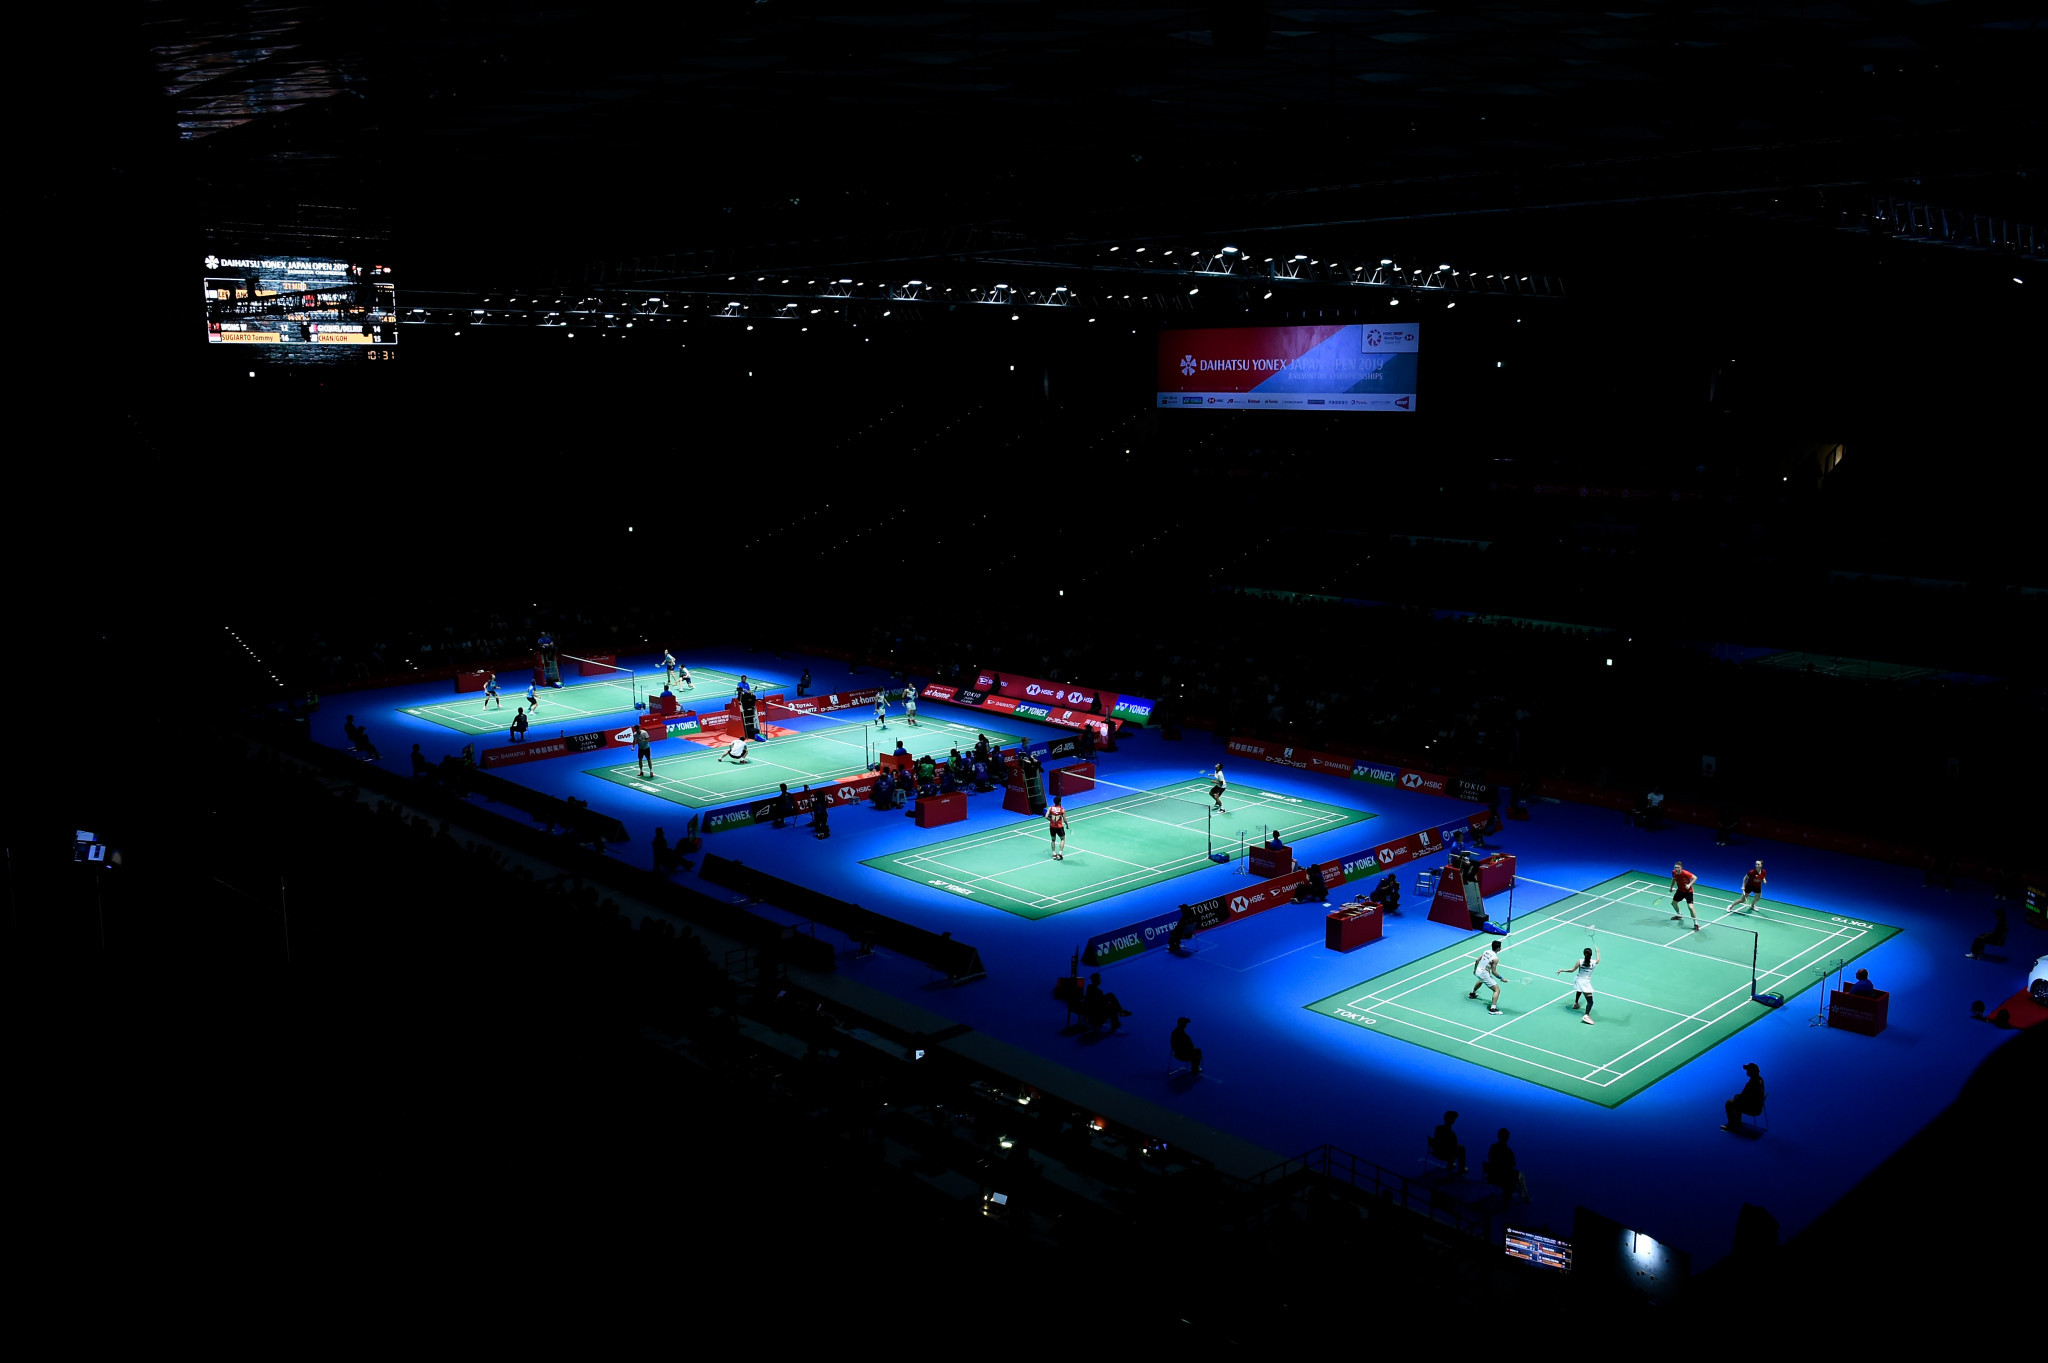 The badminton season was significantly re-jigged due to the COVID-19 pandemic ©Getty Images